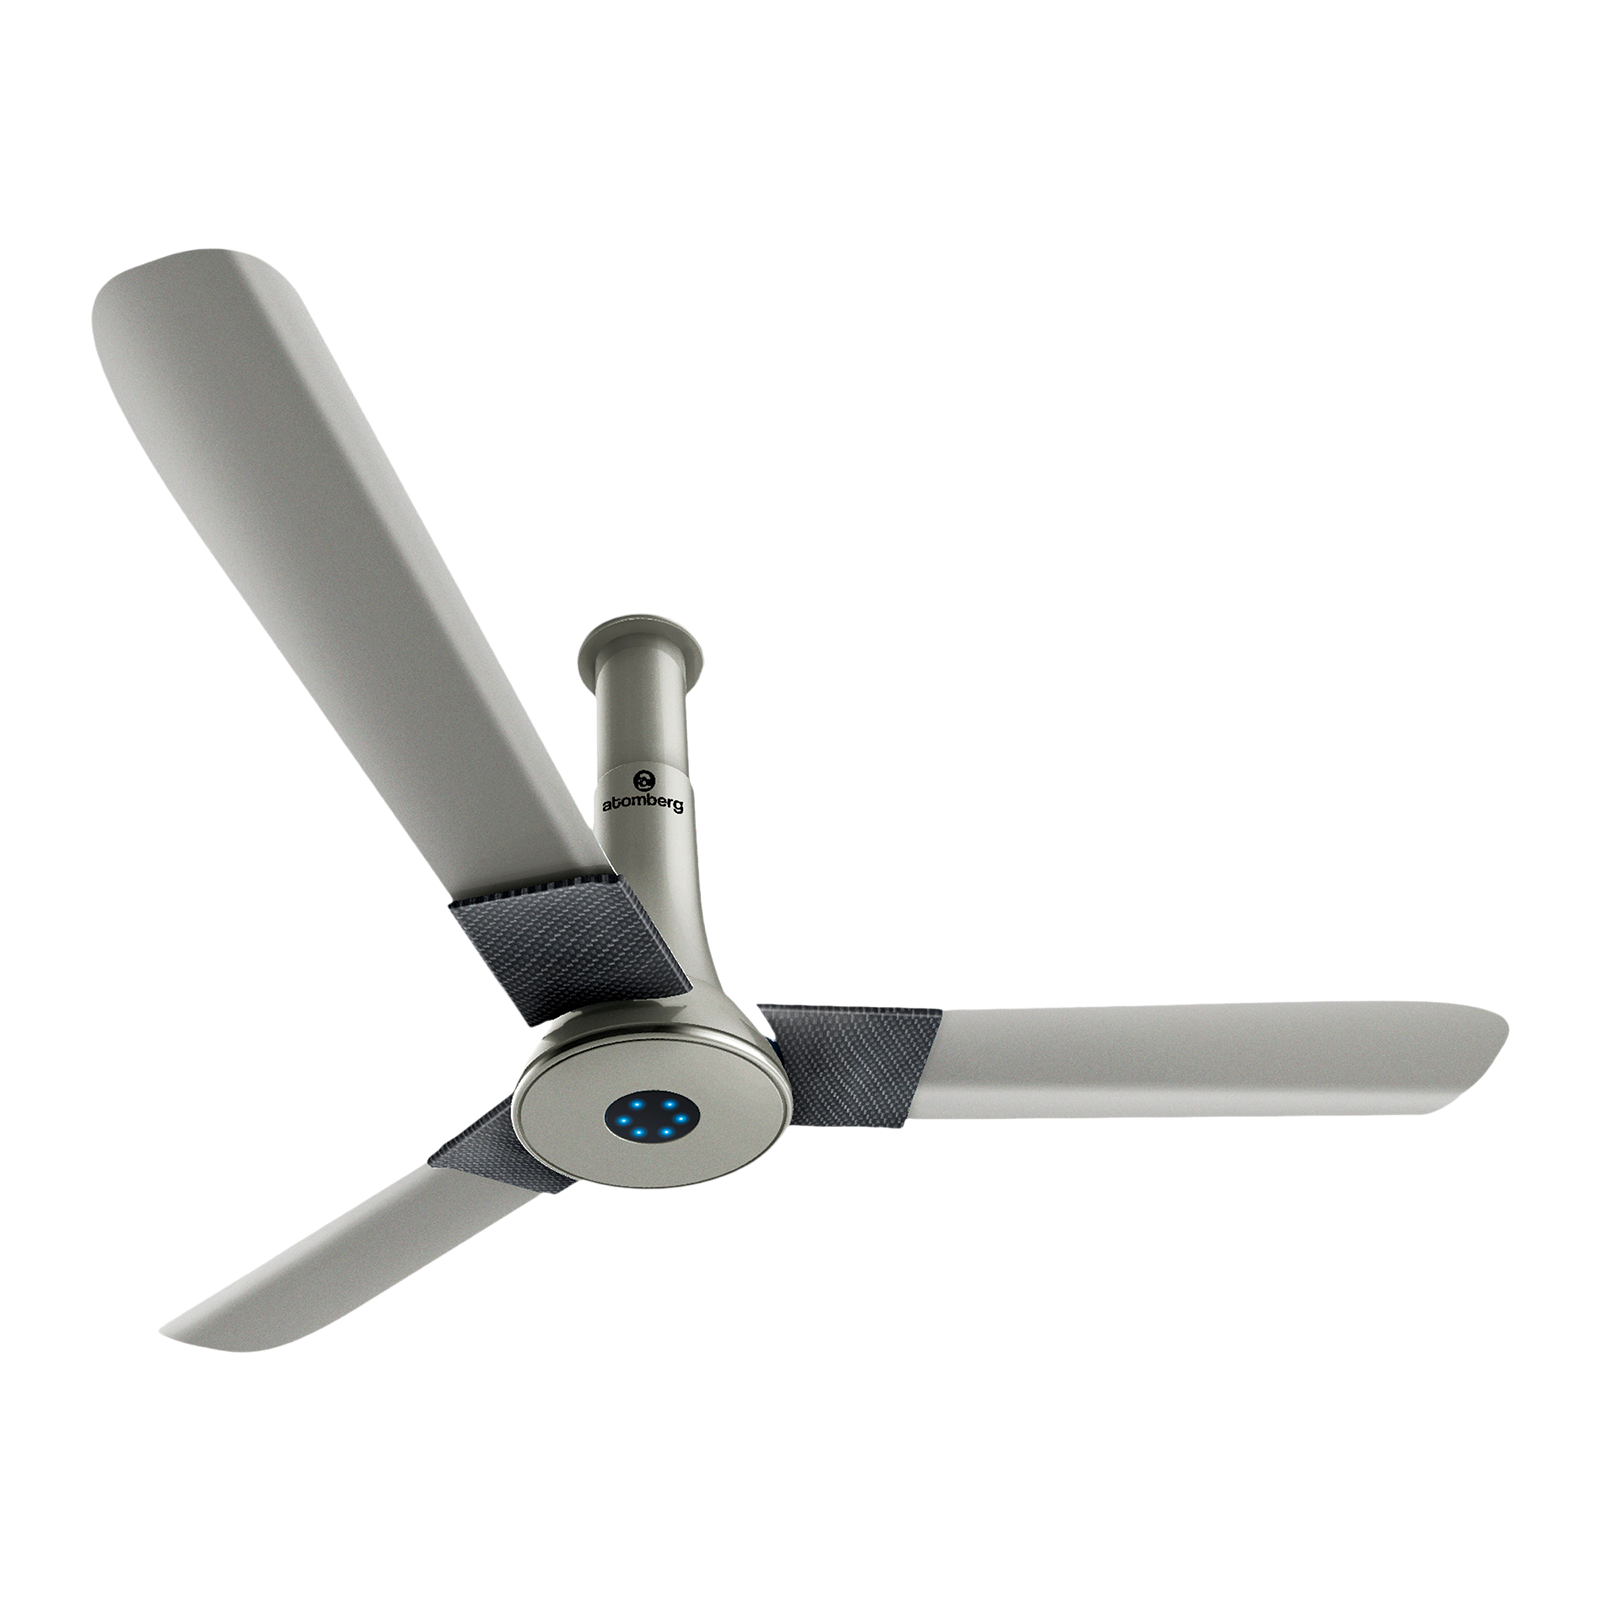 atomberg Studio+ 5 Star 1200mm 3 Blade BLDC Motor Ceiling Fan with Remote (LED Indicator, Sand Grey)